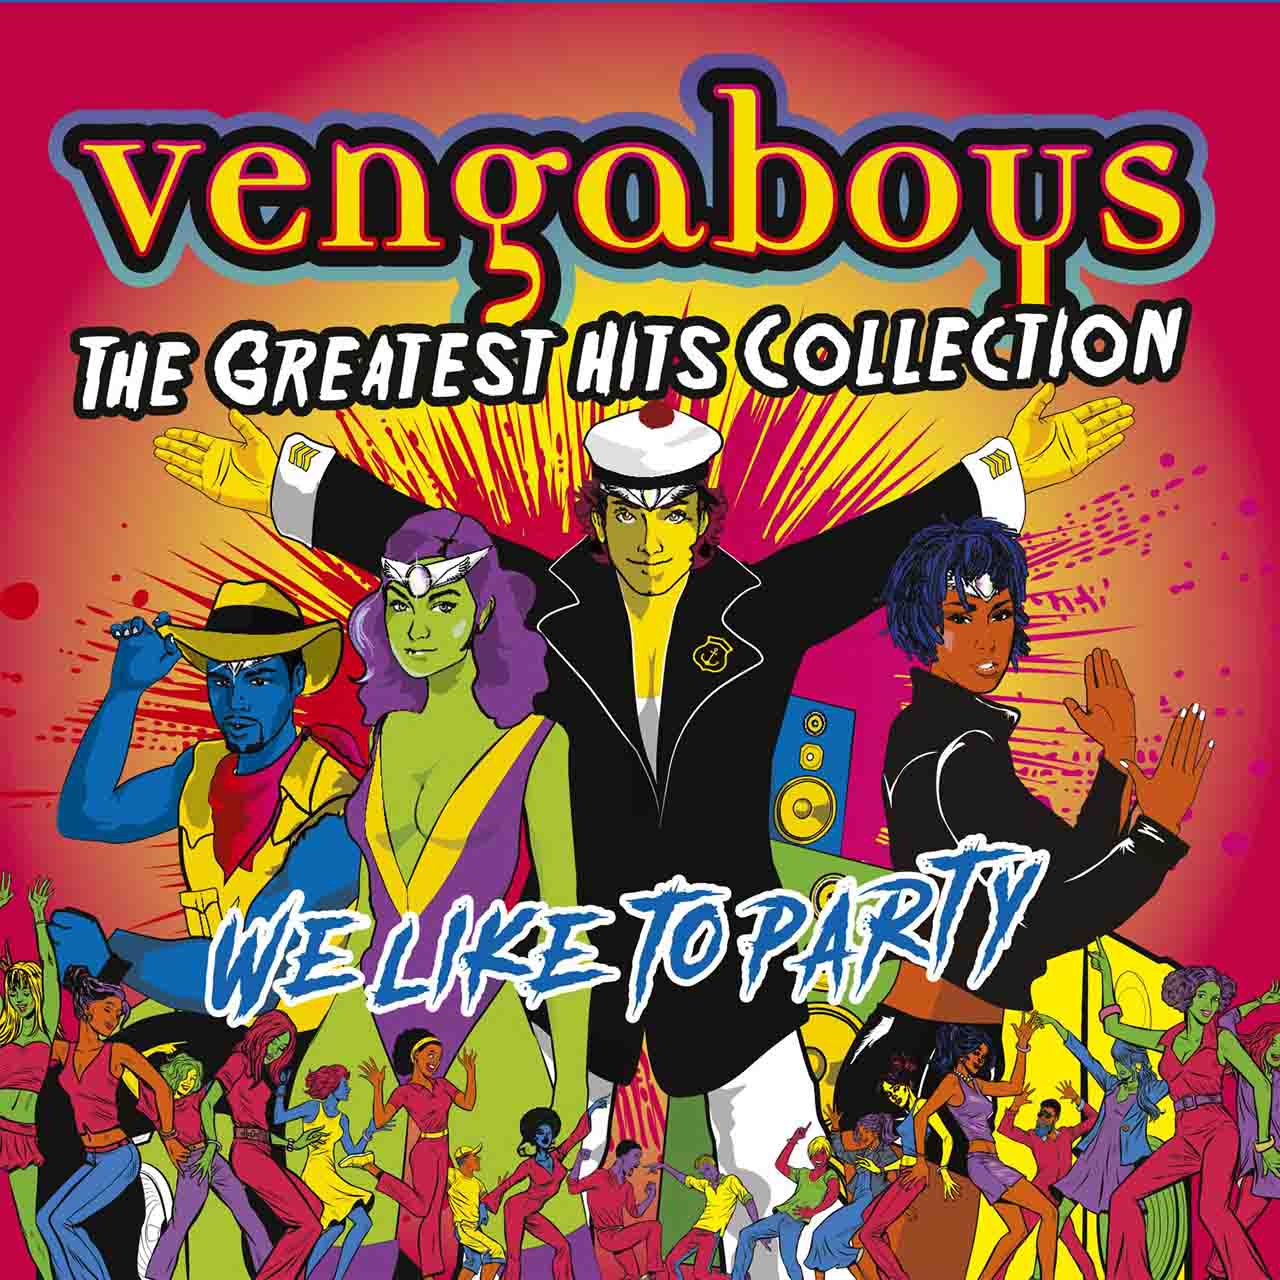 Vengaboys Announce 'The Greatest Hits Collection (We Like To Party!)'